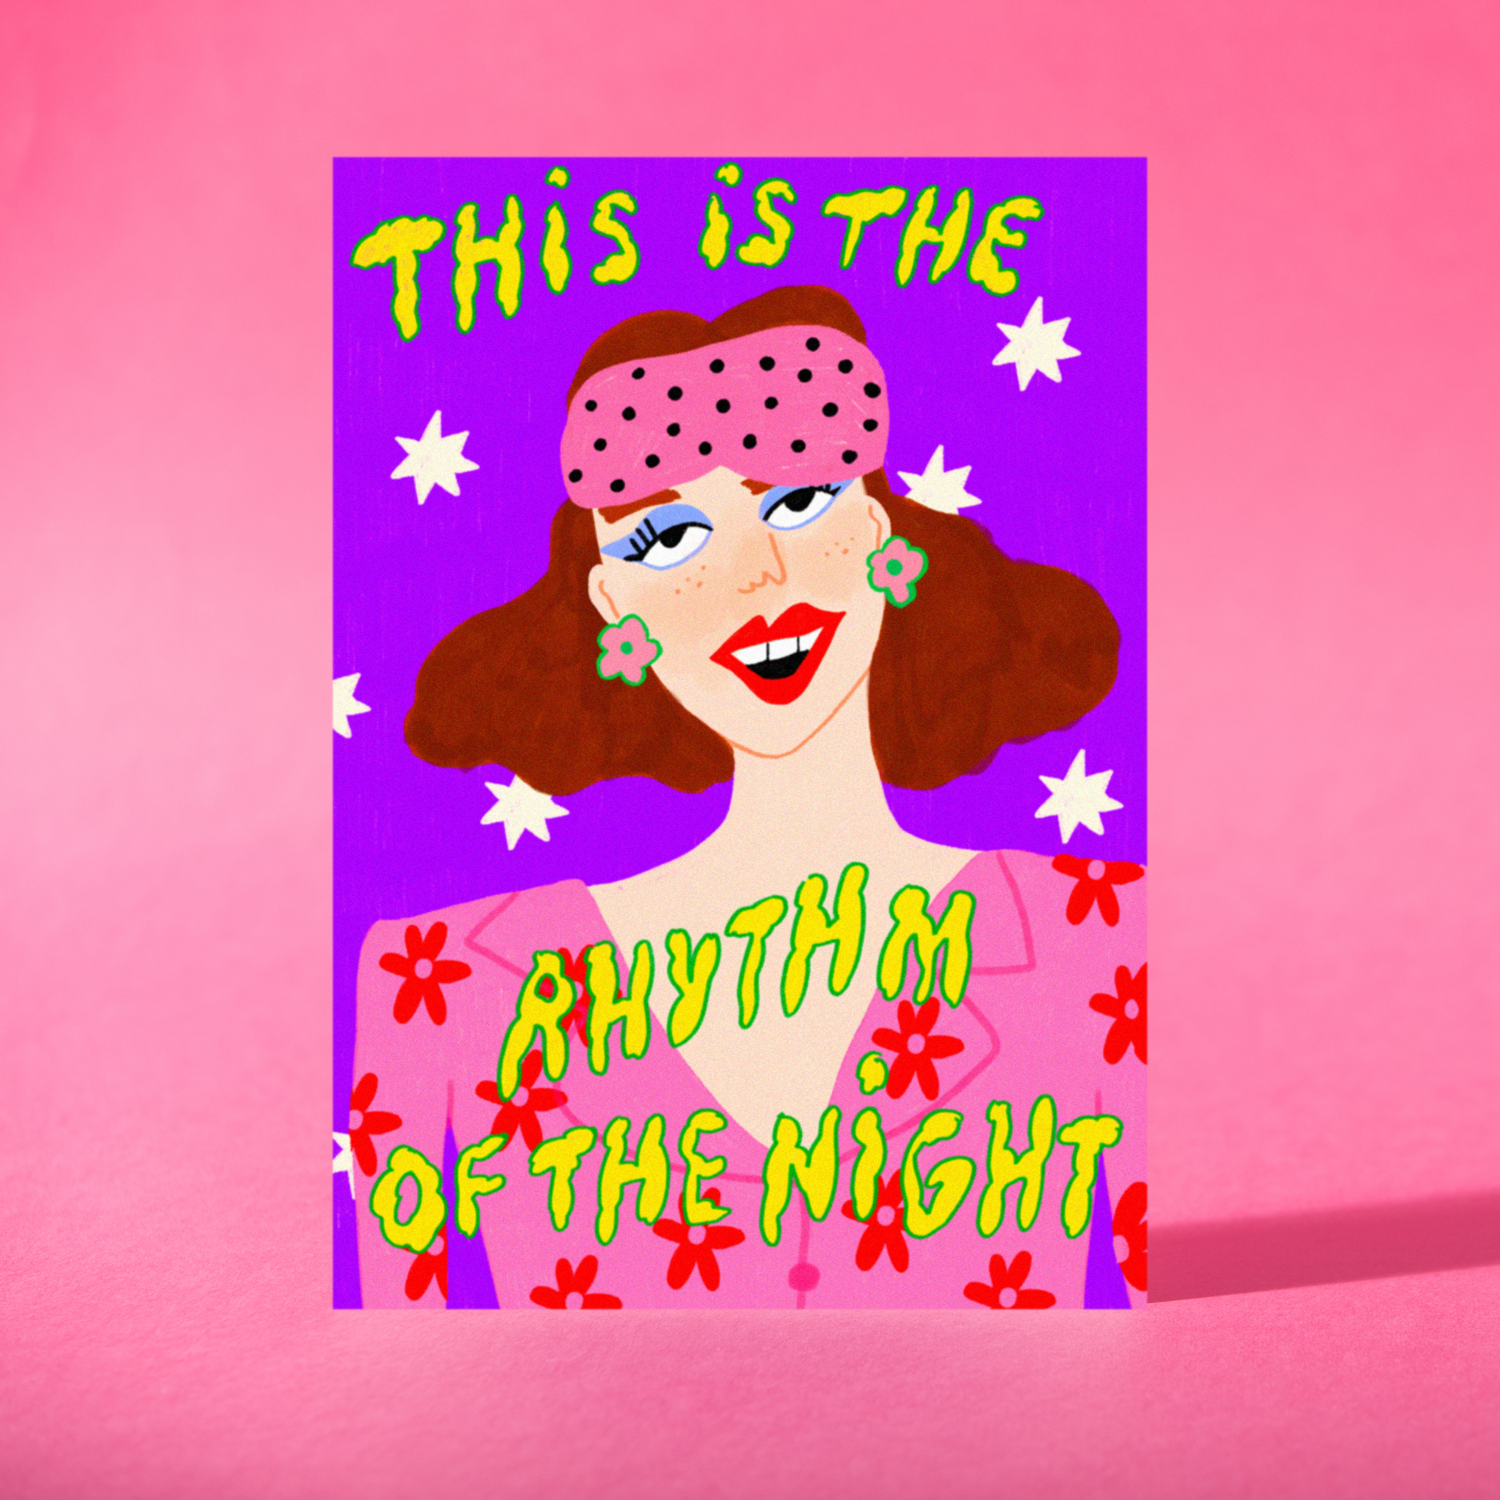 Art Print "This is the rhythm of the night"